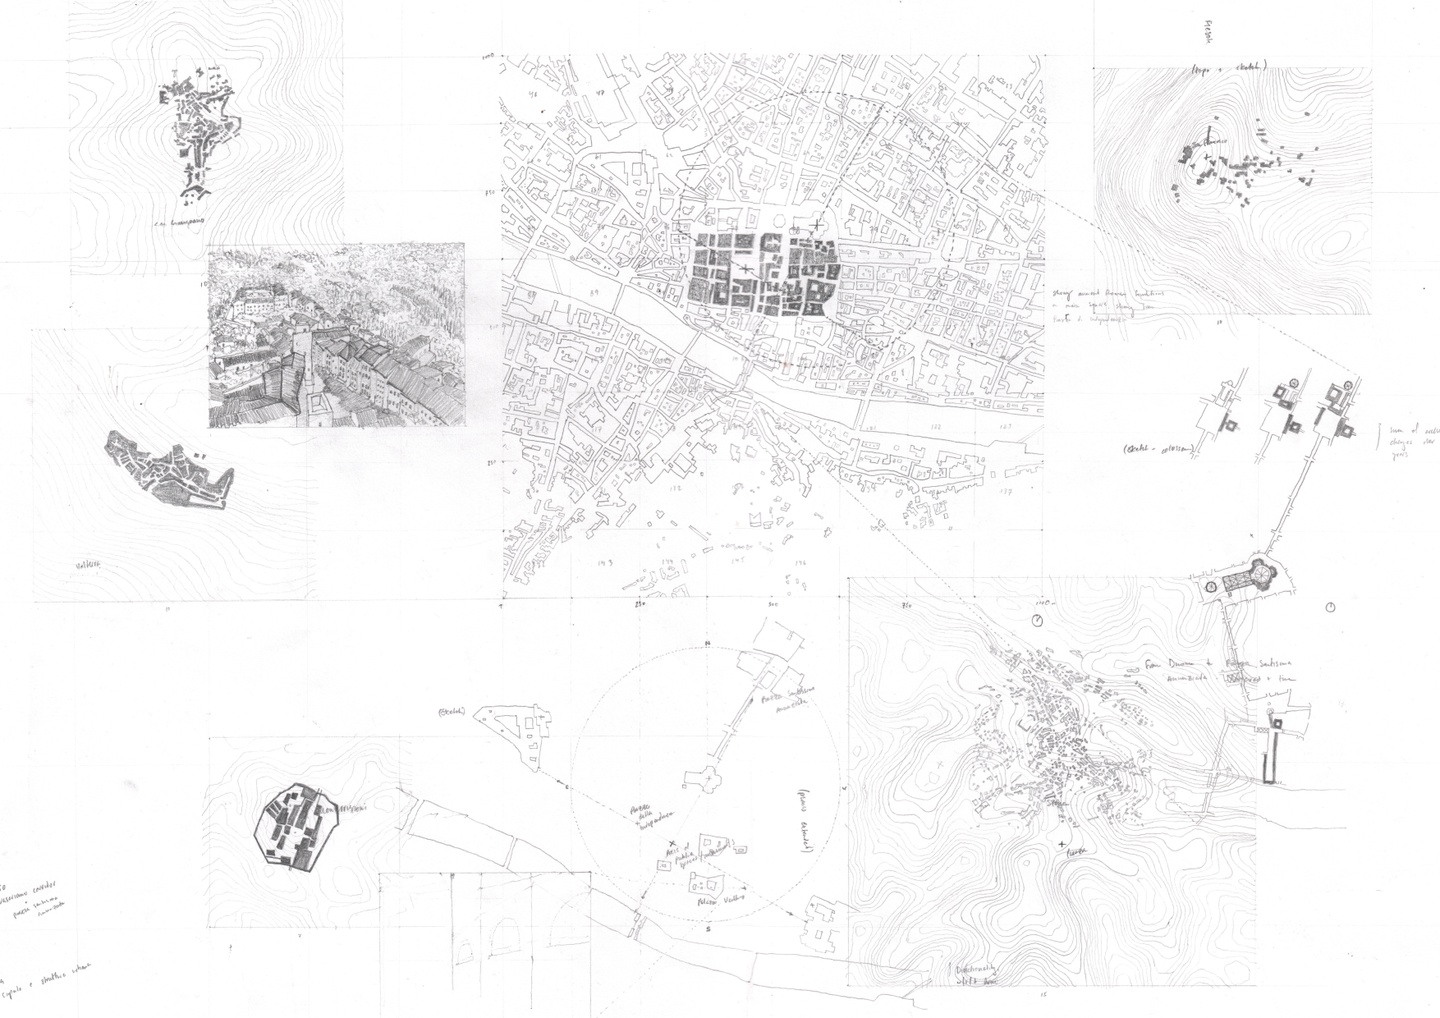 Collage of hand-drawn city plans and topographic maps of Florence, Italy.